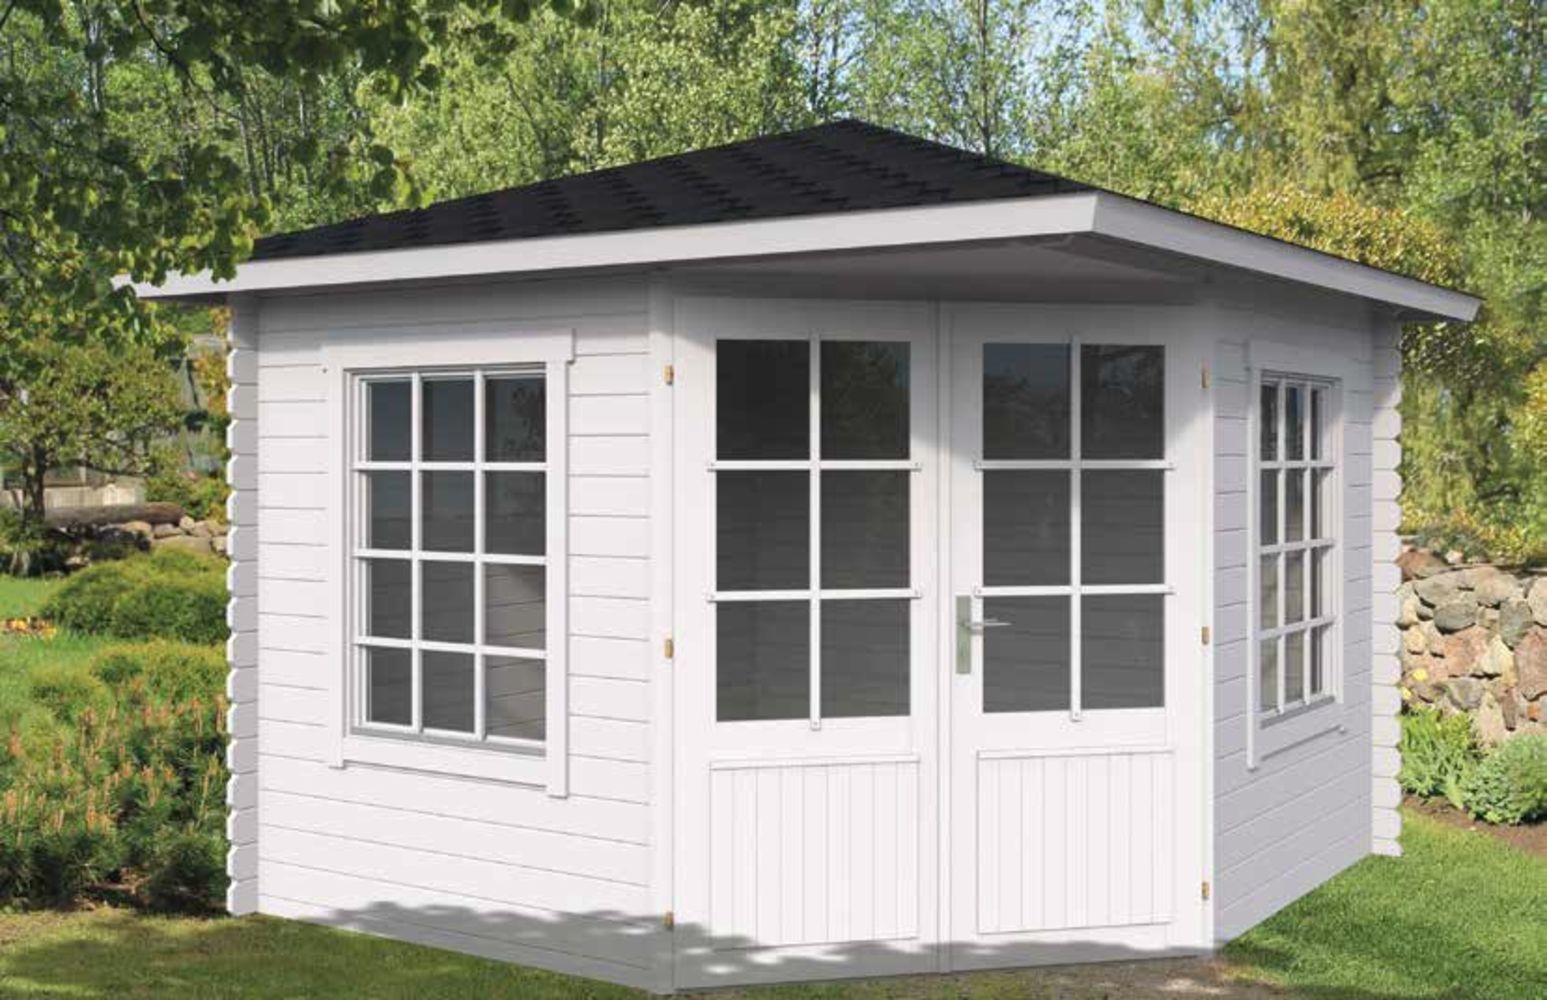 Brand New Spruce Home Office Structures - Garden Offices & Buildings - Range Of Styles & Sizes To Suit Any Garden